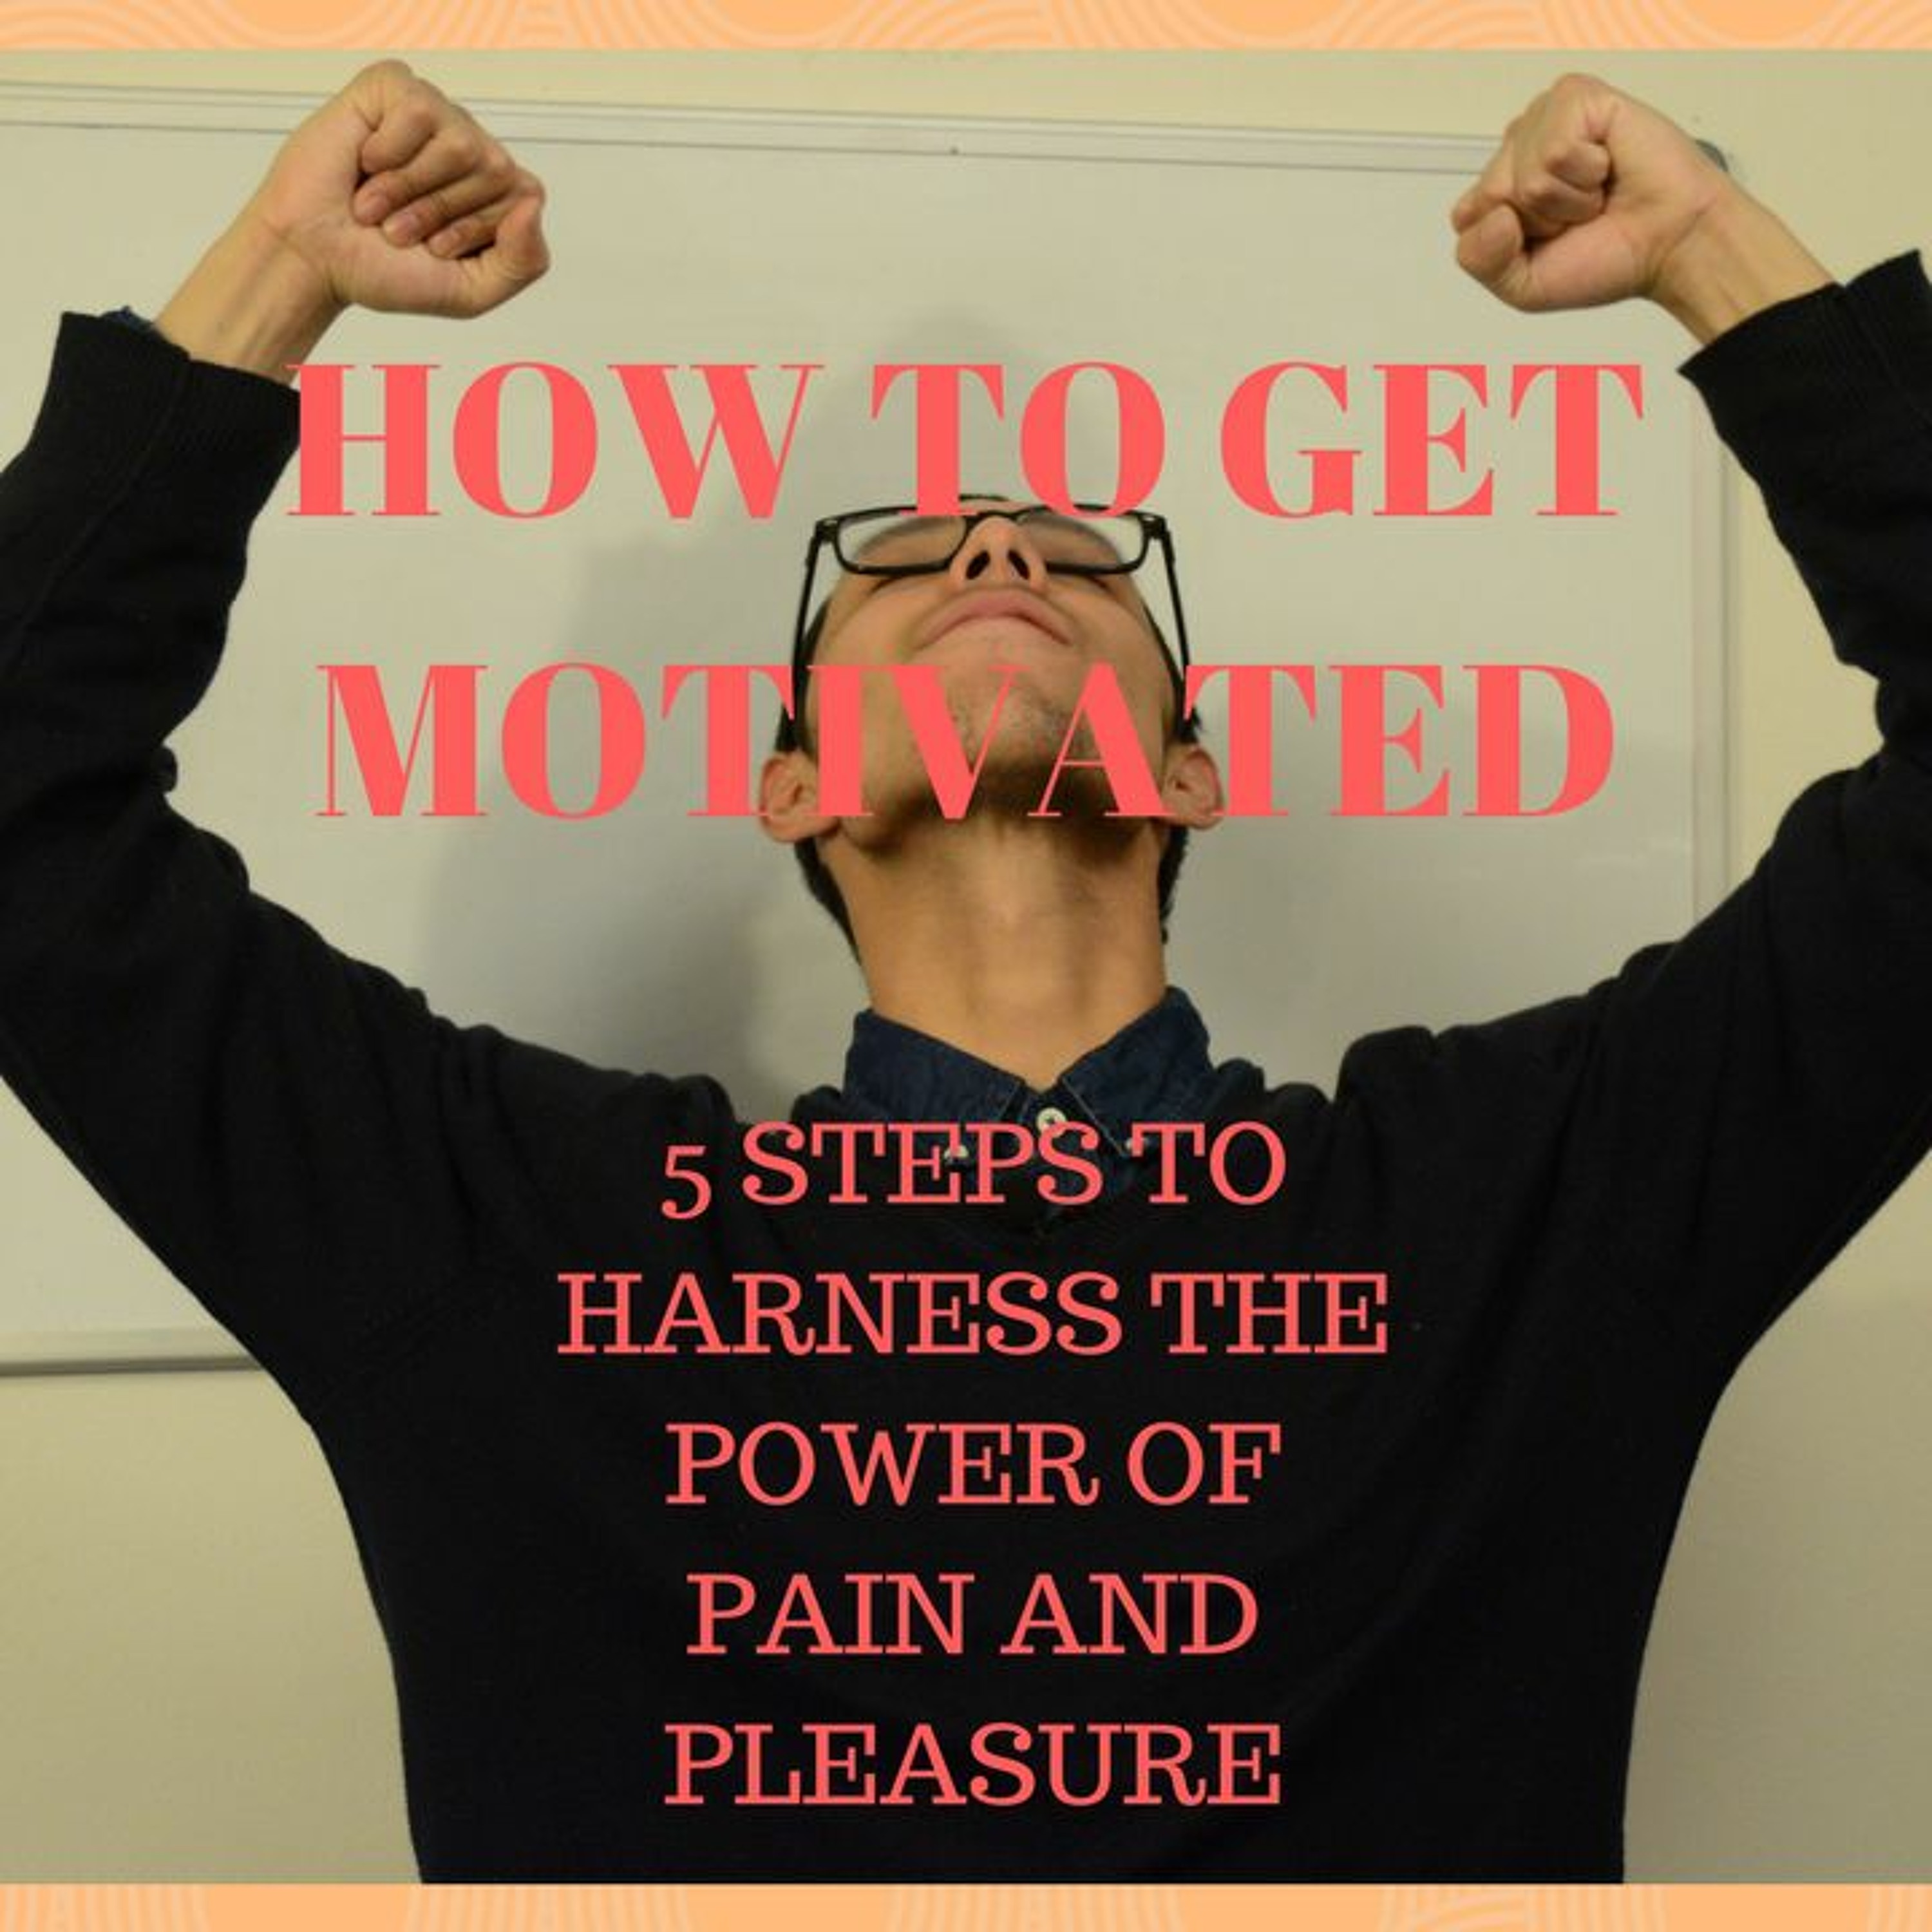 How To Get Motivated--5 Steps To Harness The Power Of Pain and Pleasure